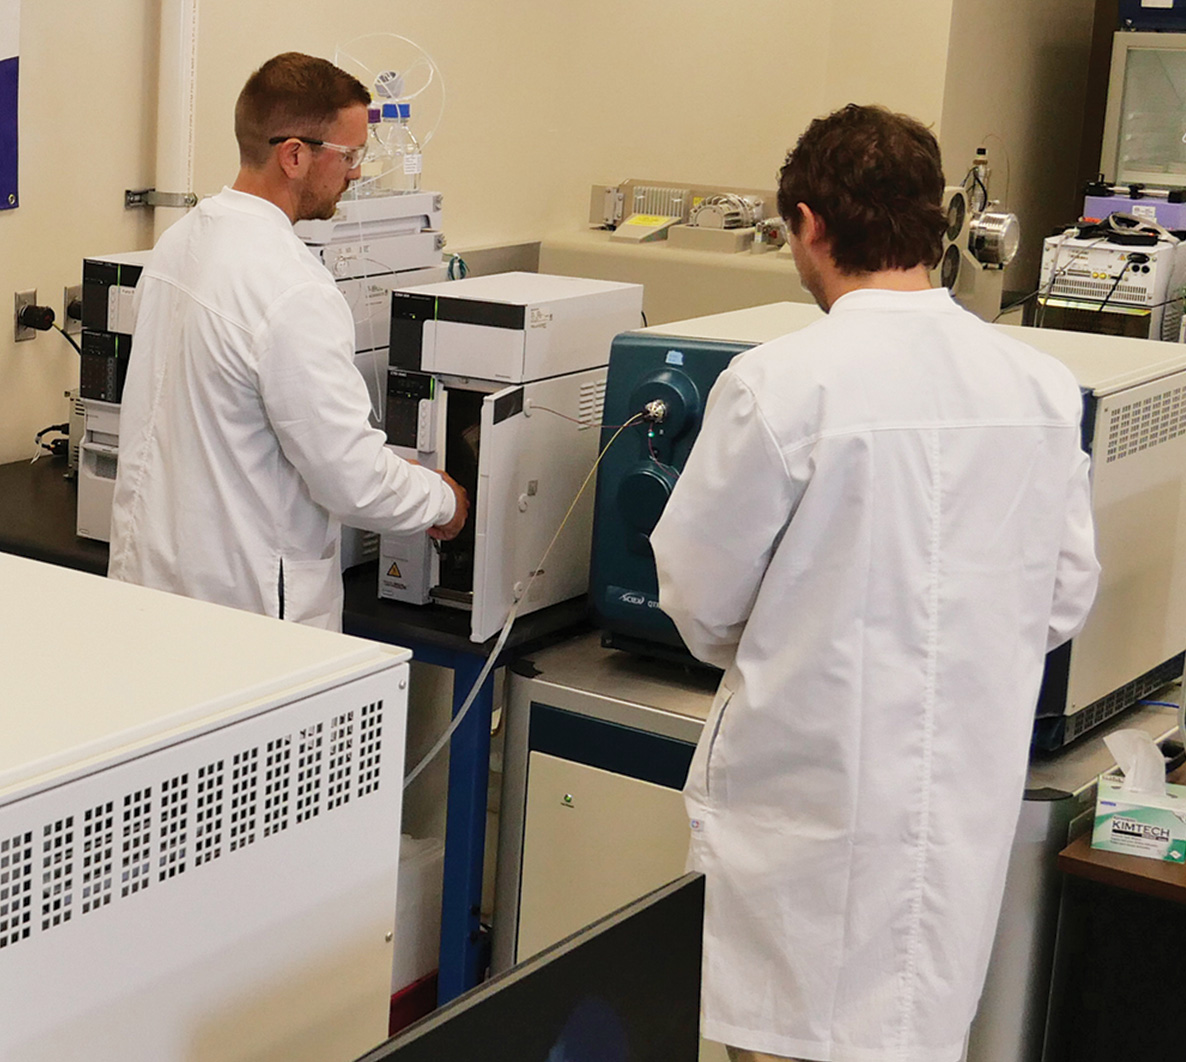 Lab technicians working with lab equipment